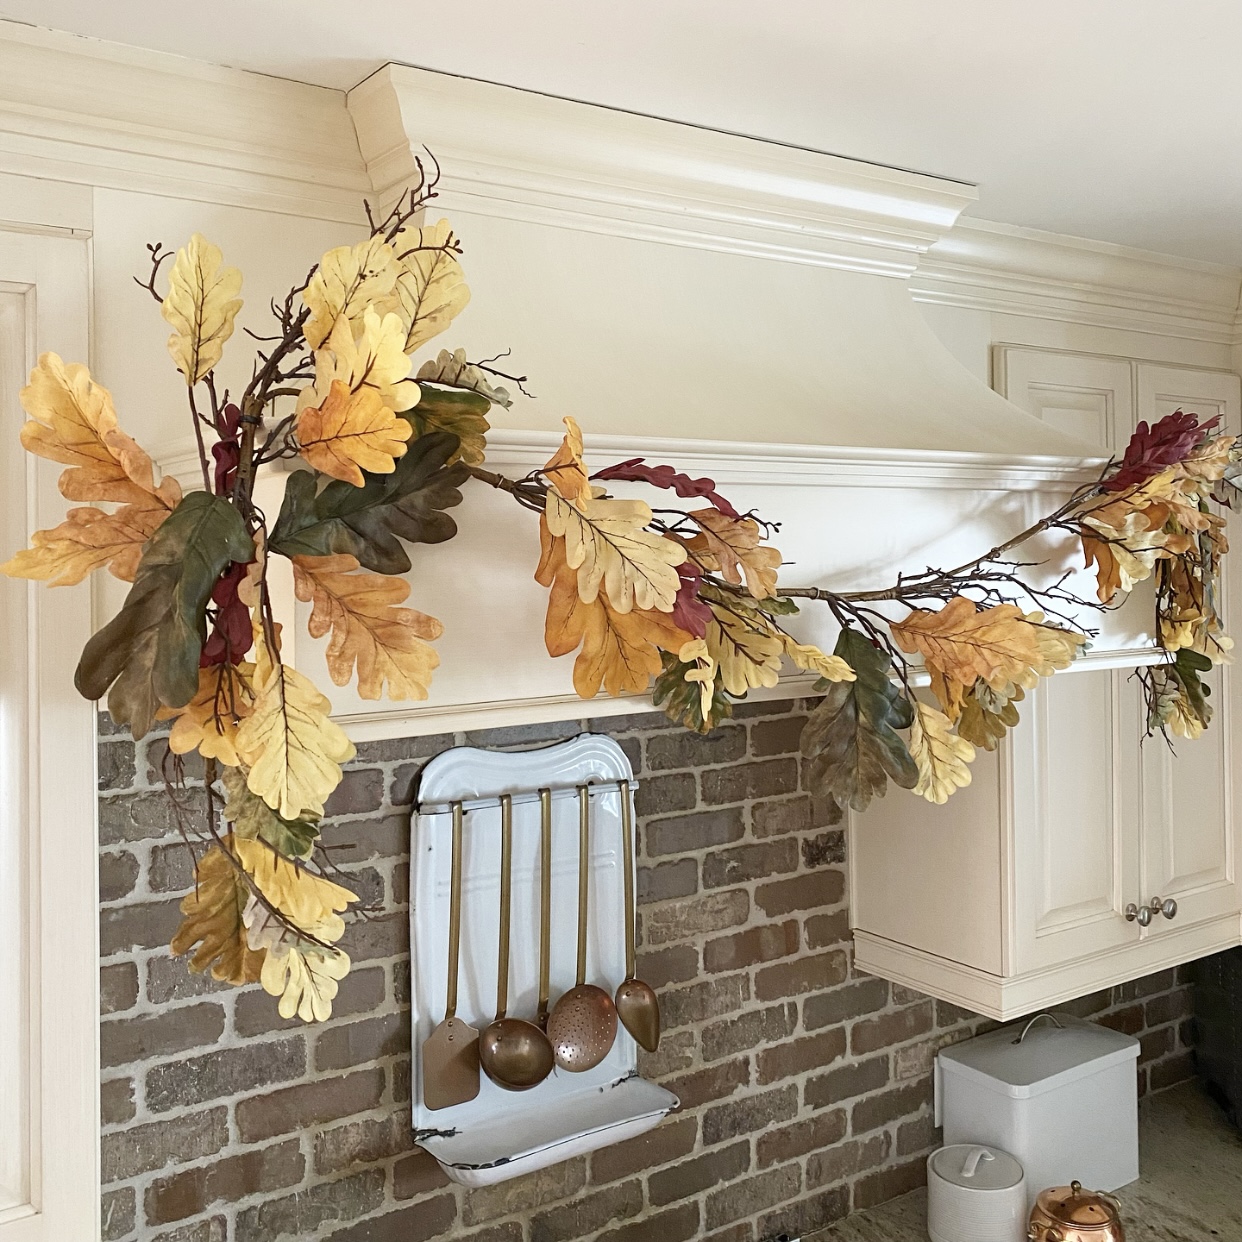 Up close view of Fall garland on the hood above the range in the kitchen.